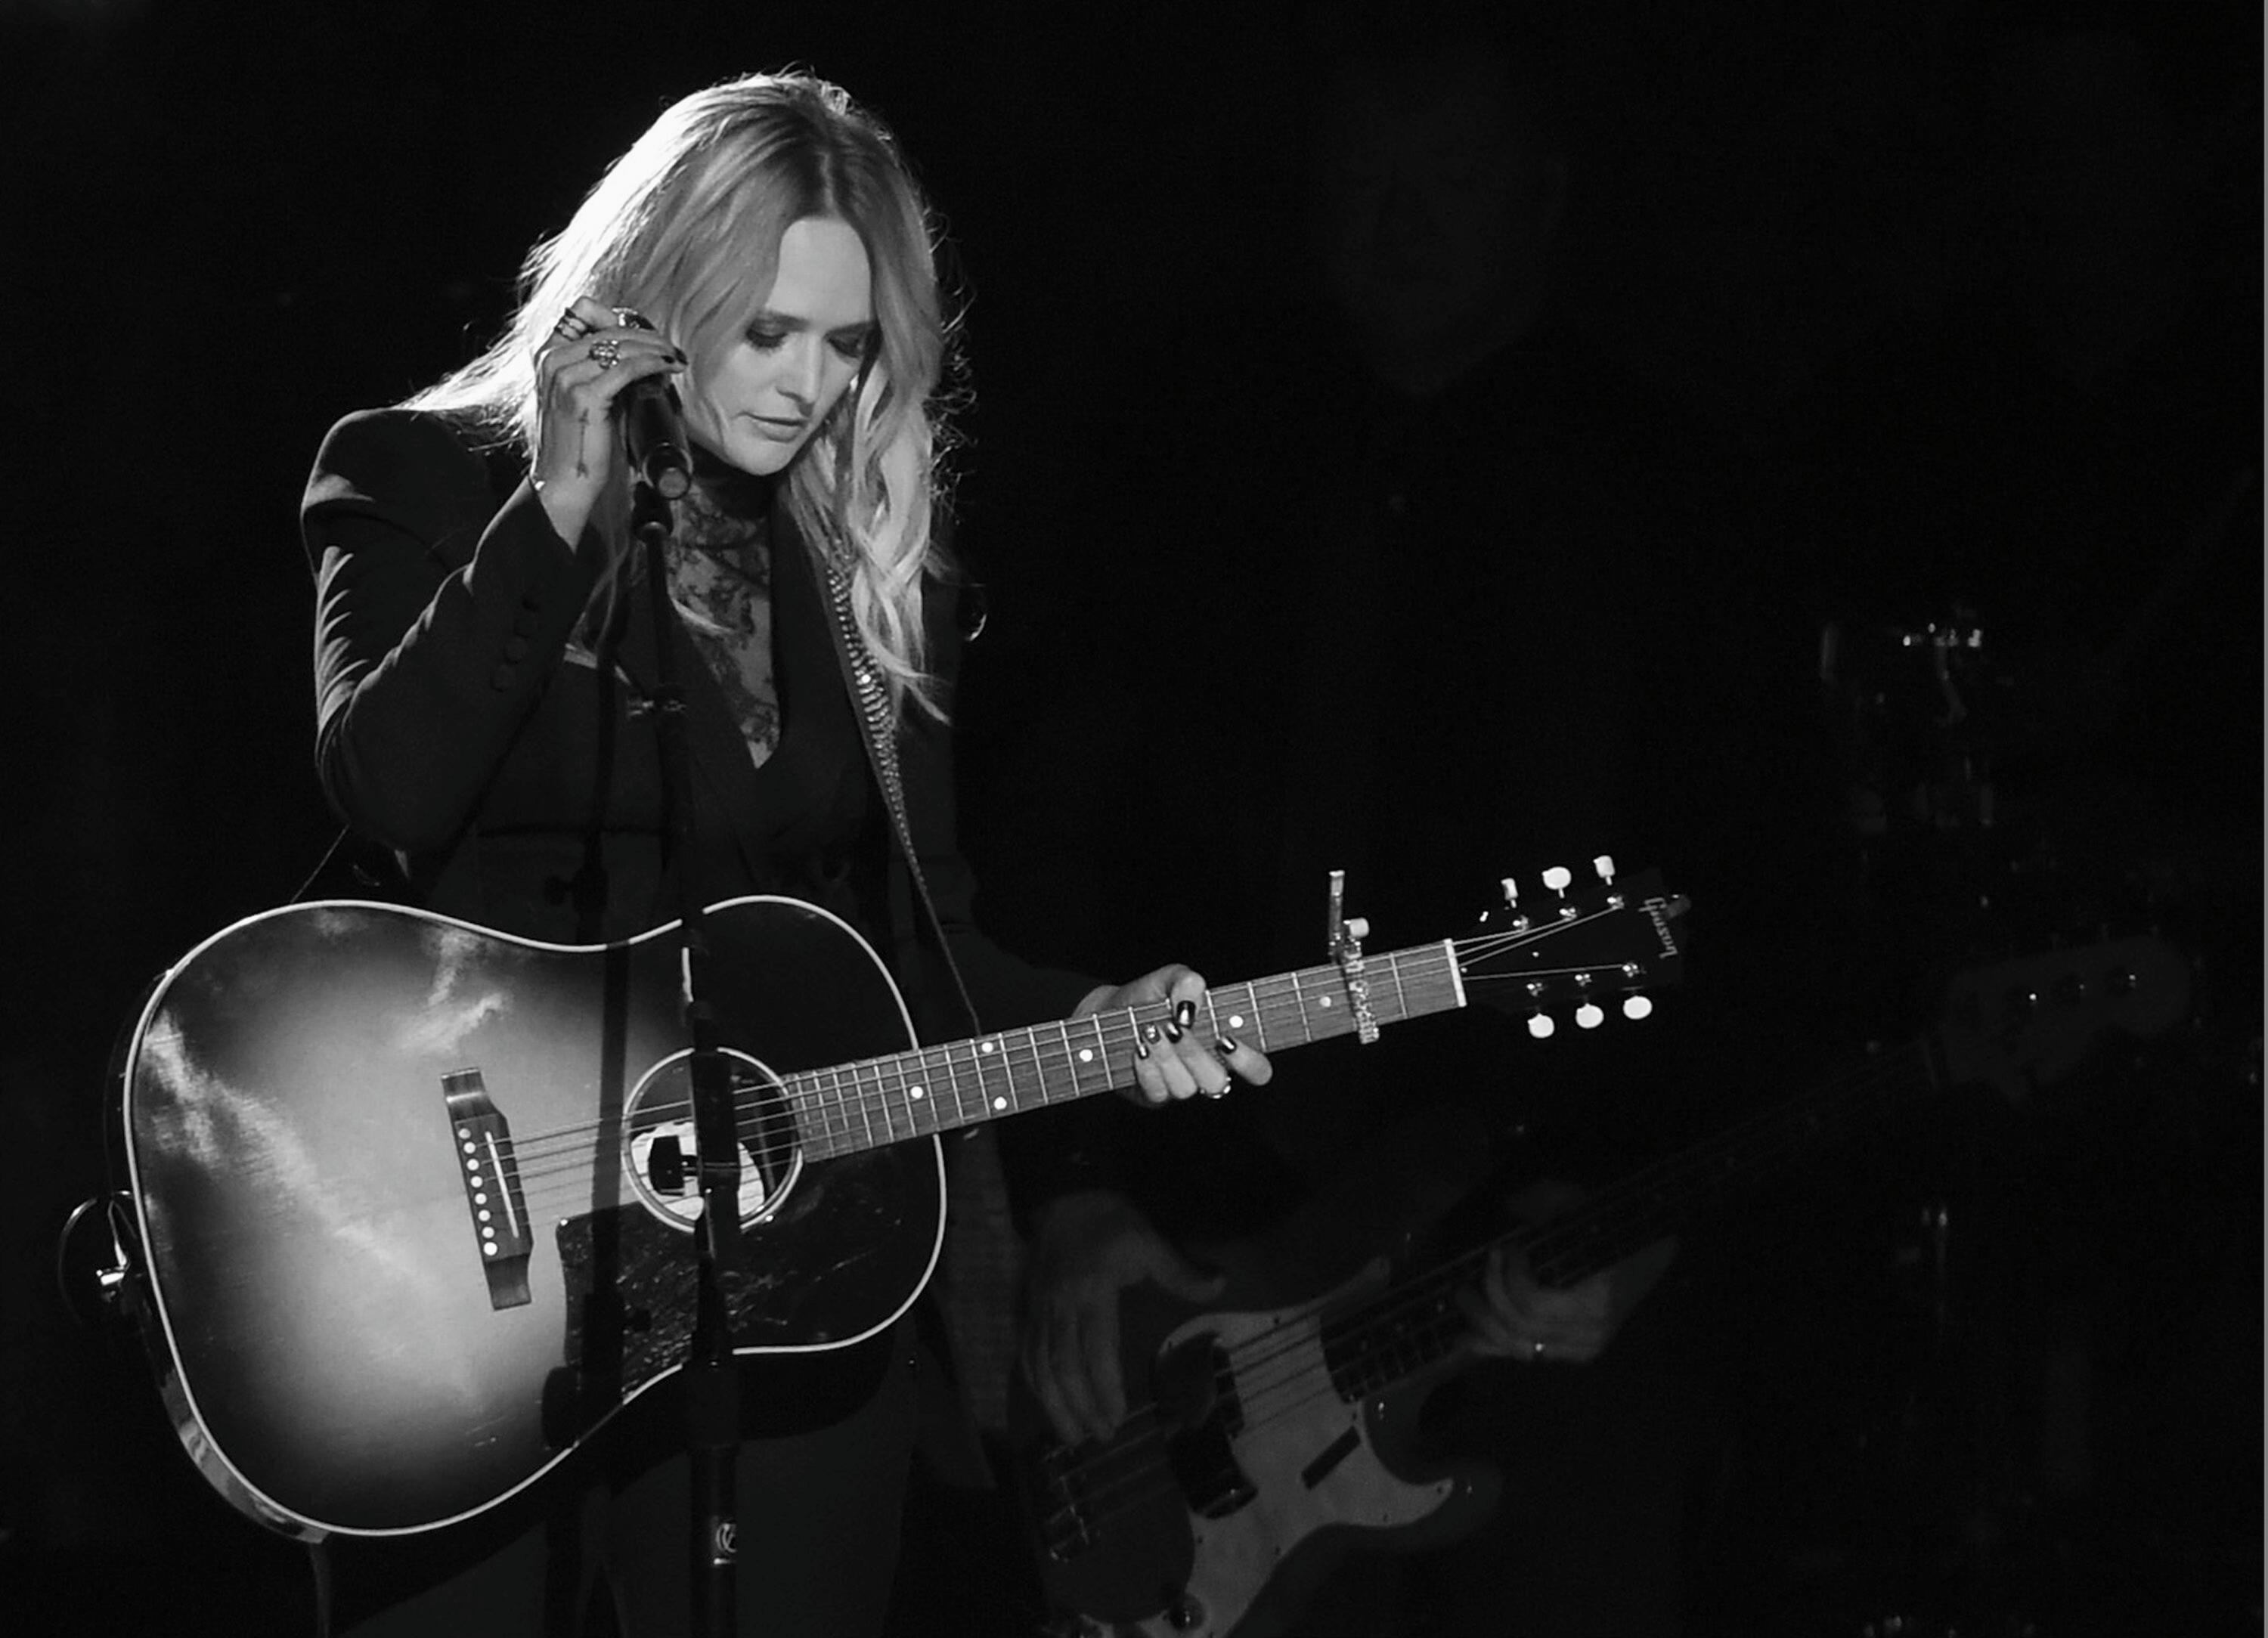 NASHVILLE, TN - NOVEMBER 02: (EDITORS NOTE: Image has been converted to black and white) Miranda Lambert performs during the 50th annual CMA Awards at the Bridgestone Arena on November 2, 2016 in Nashville, Tennessee.  (Photo by Rick Diamond/Getty Images)